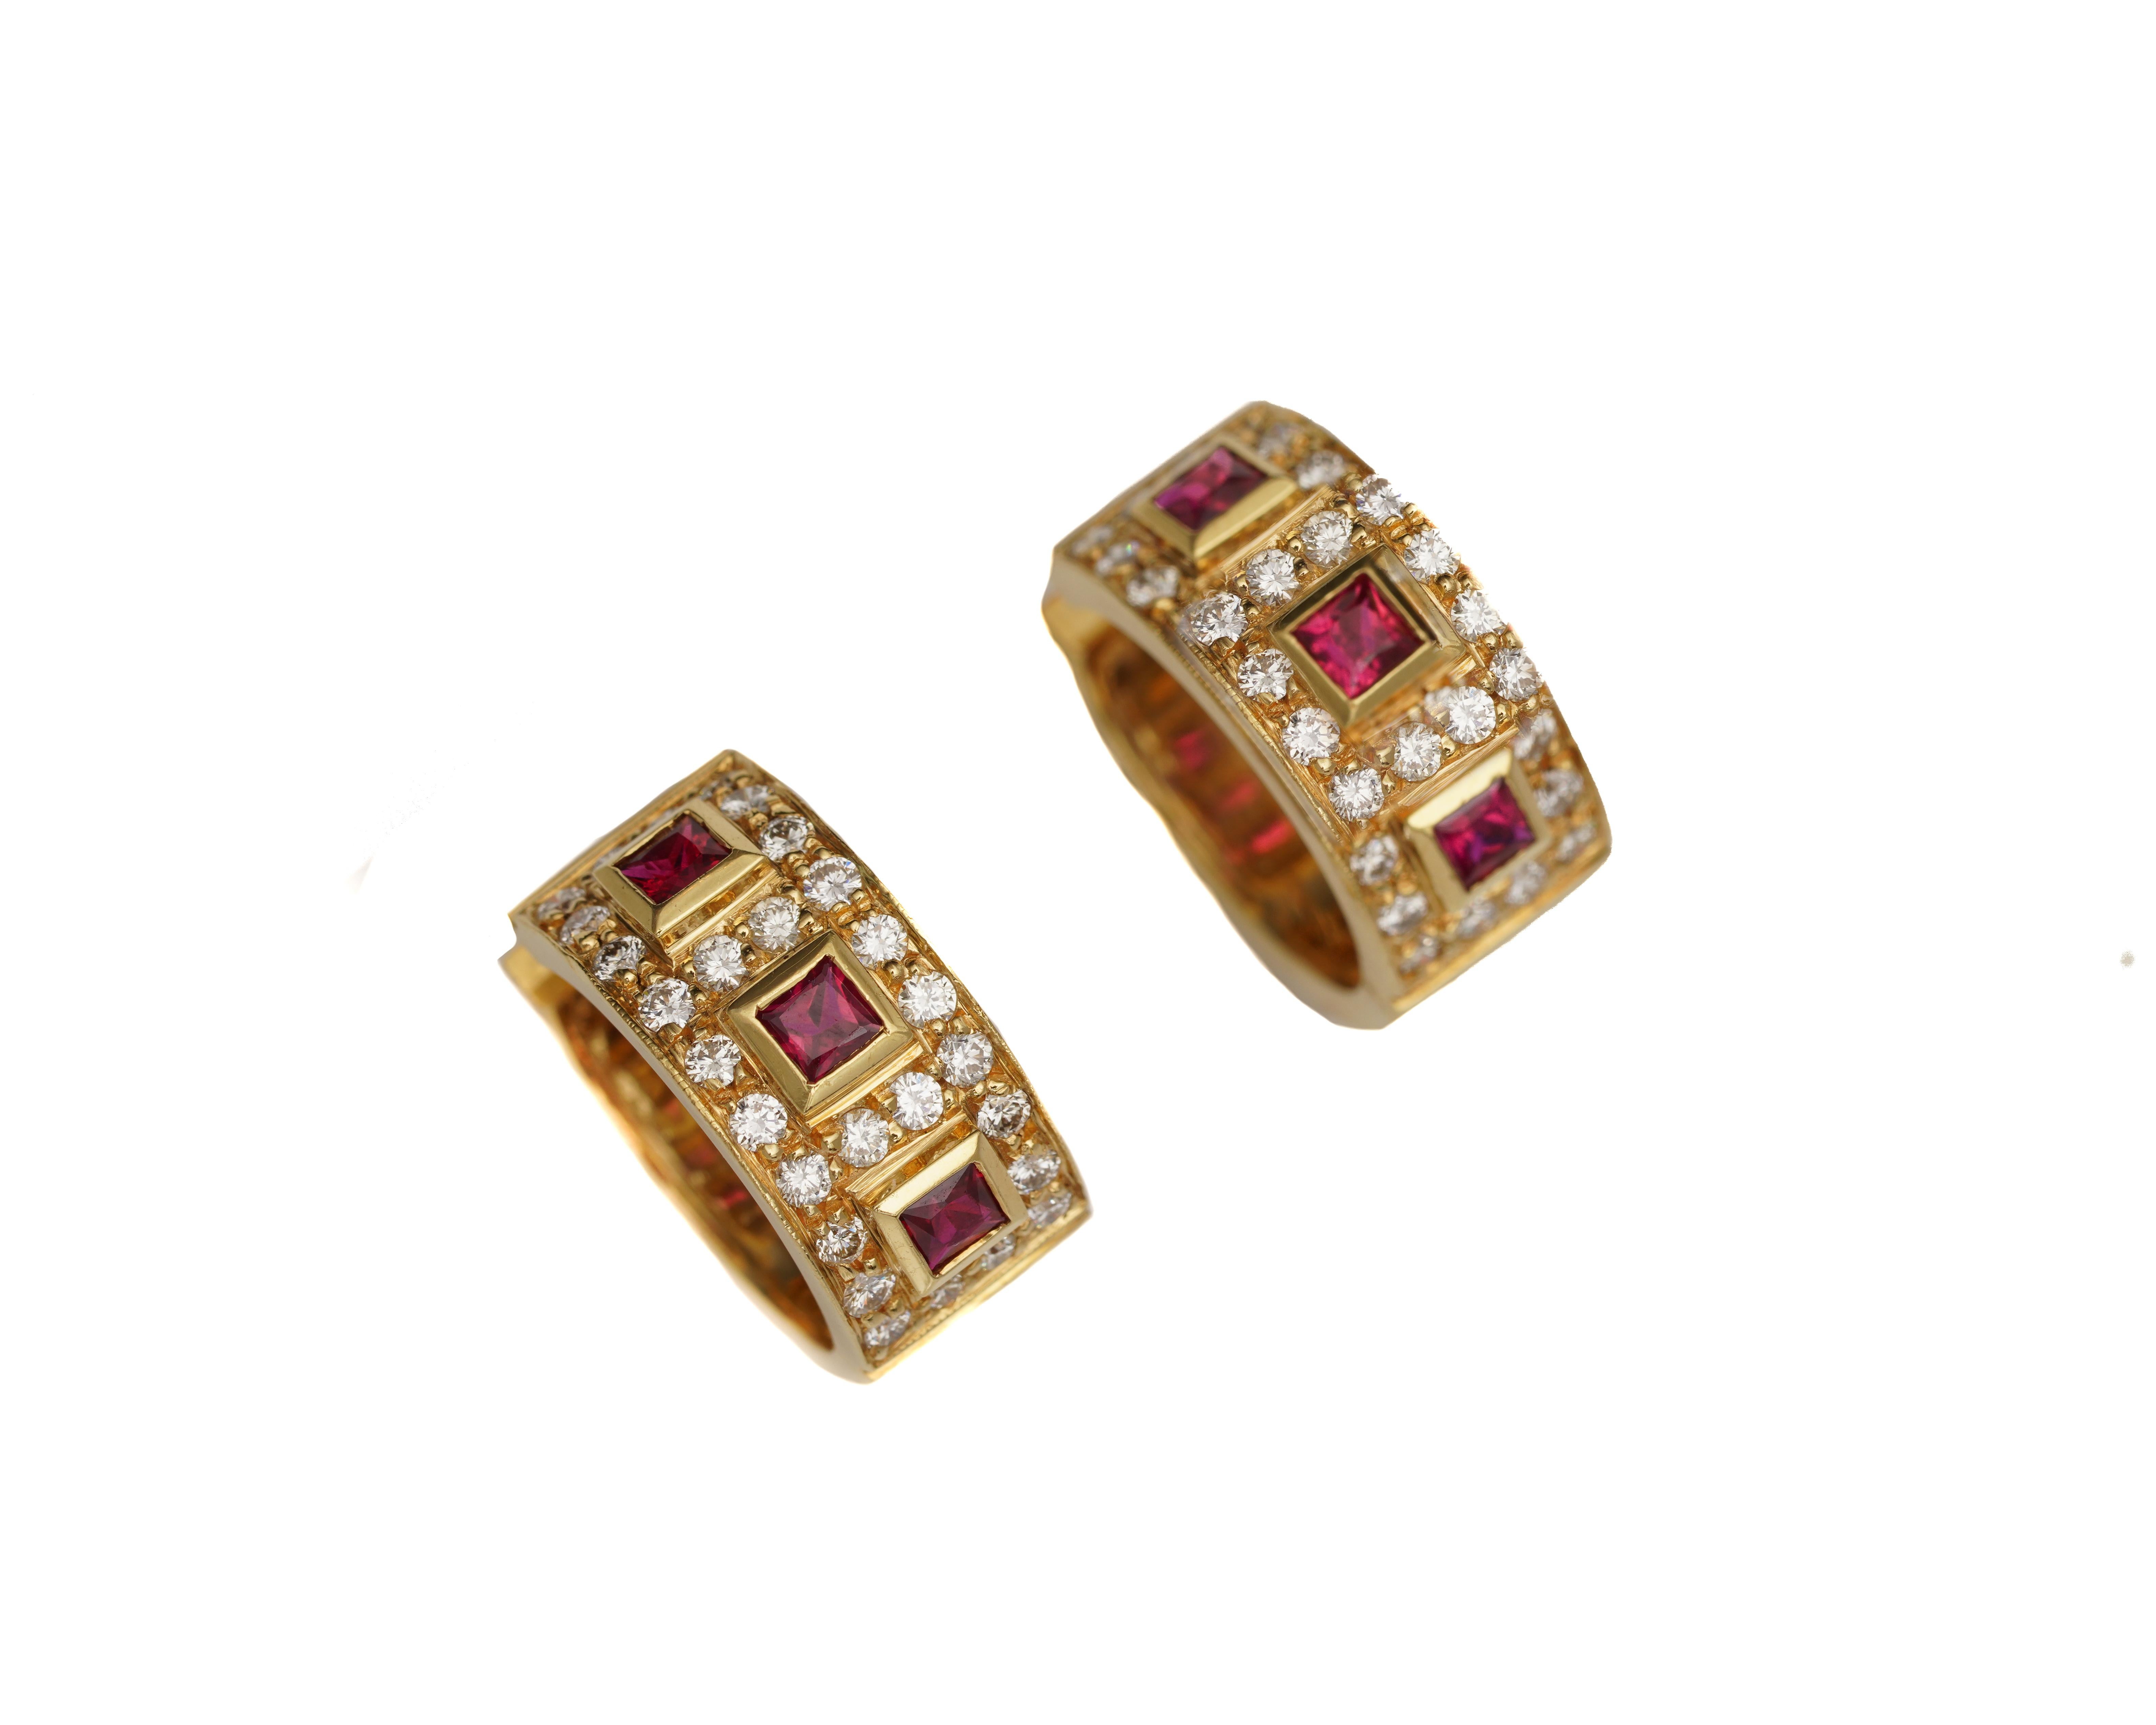 Item Details:
Metal type: 18 Karat Yellow Gold
Weight: 21 grams

Diamond Details:
Cut: Round
Carat: 1 Carat Total Weight
Clarity: VS
Color: H

All diamonds are prong-set. Ruby stones are bezel set. 

Ruby details: .5 Carat Total Weight, 3 on each